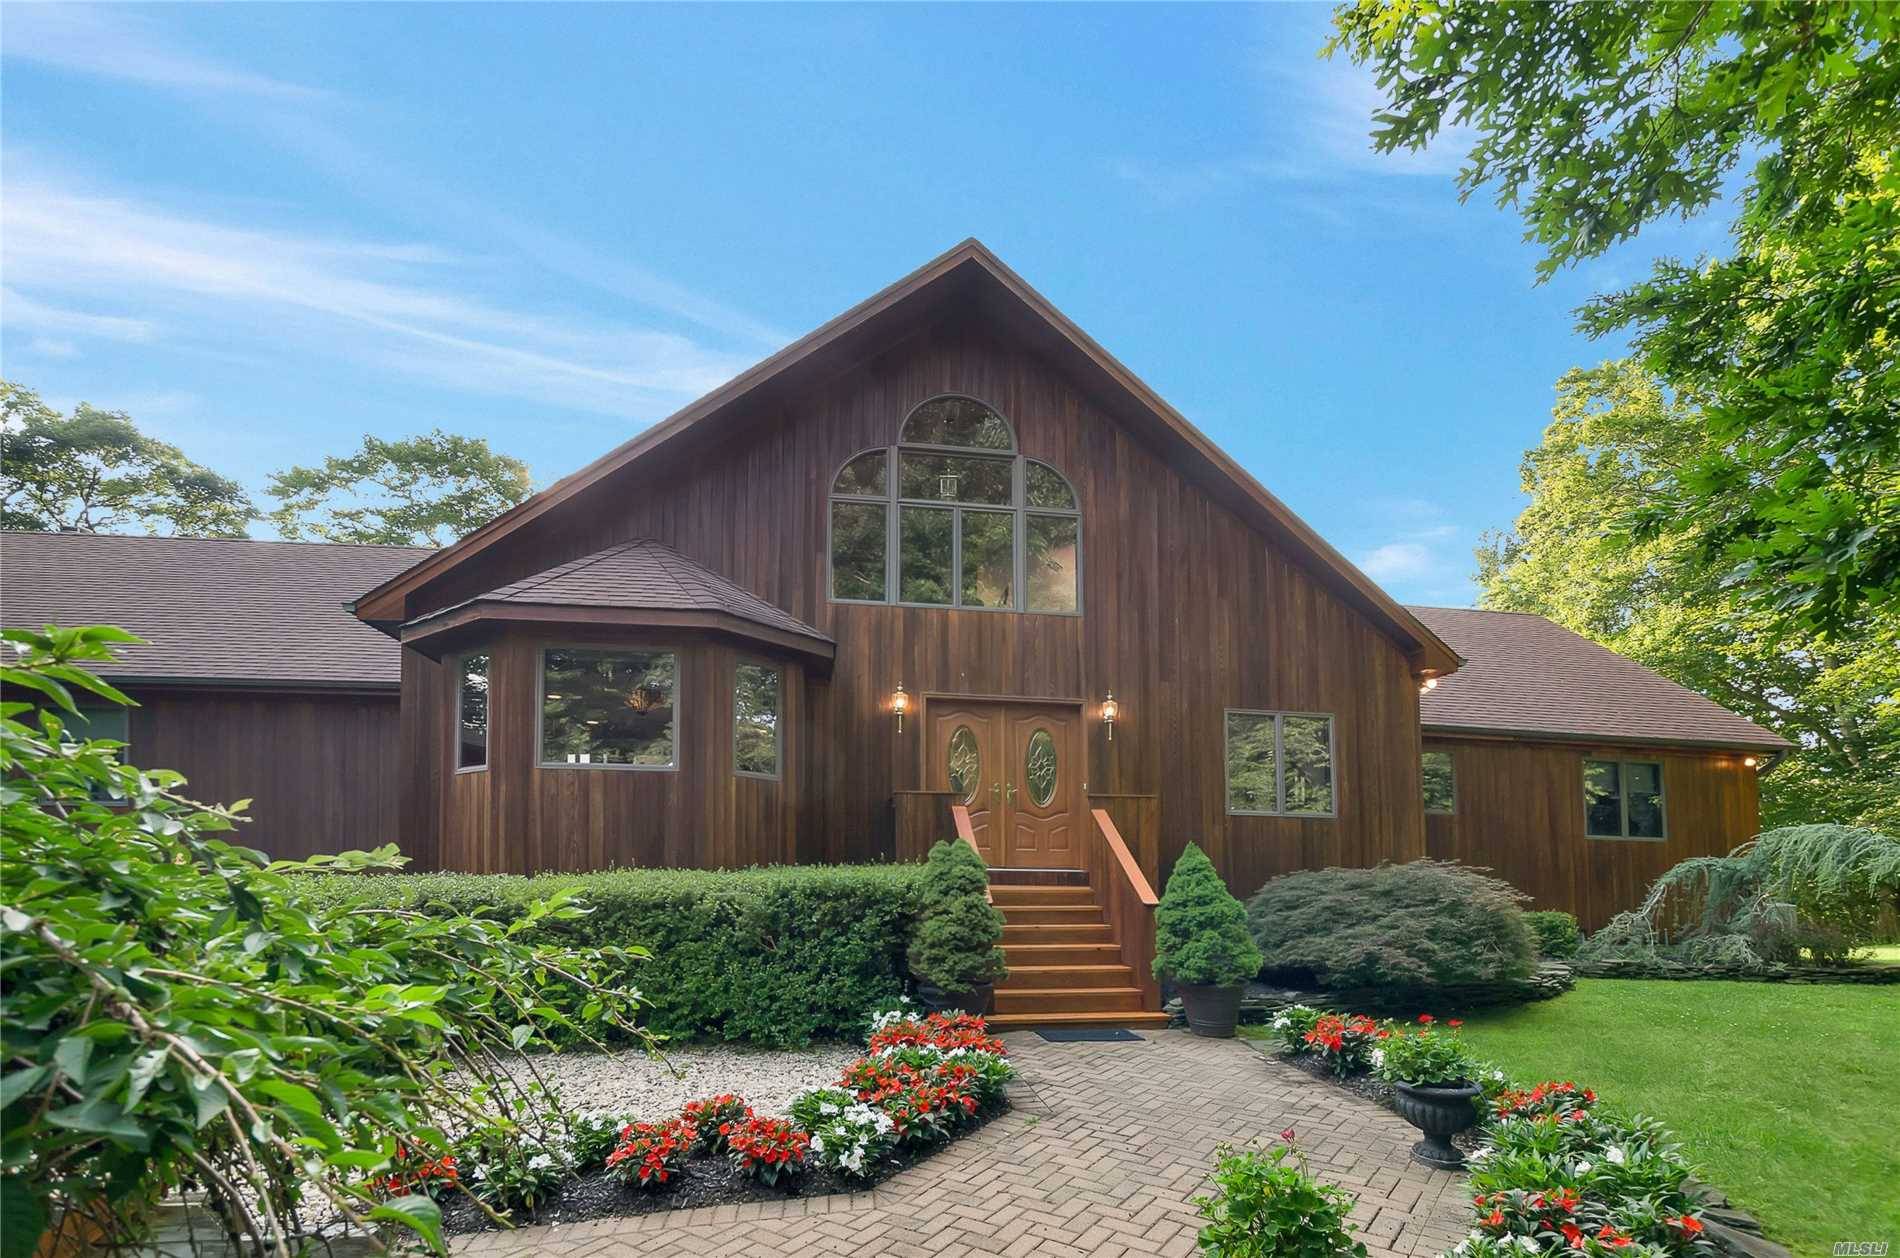 Baiting Hollow-Feel The Peace And Tranquility That Comes Along With The Expansive Tree-Top And Open Long Island Sound Views.